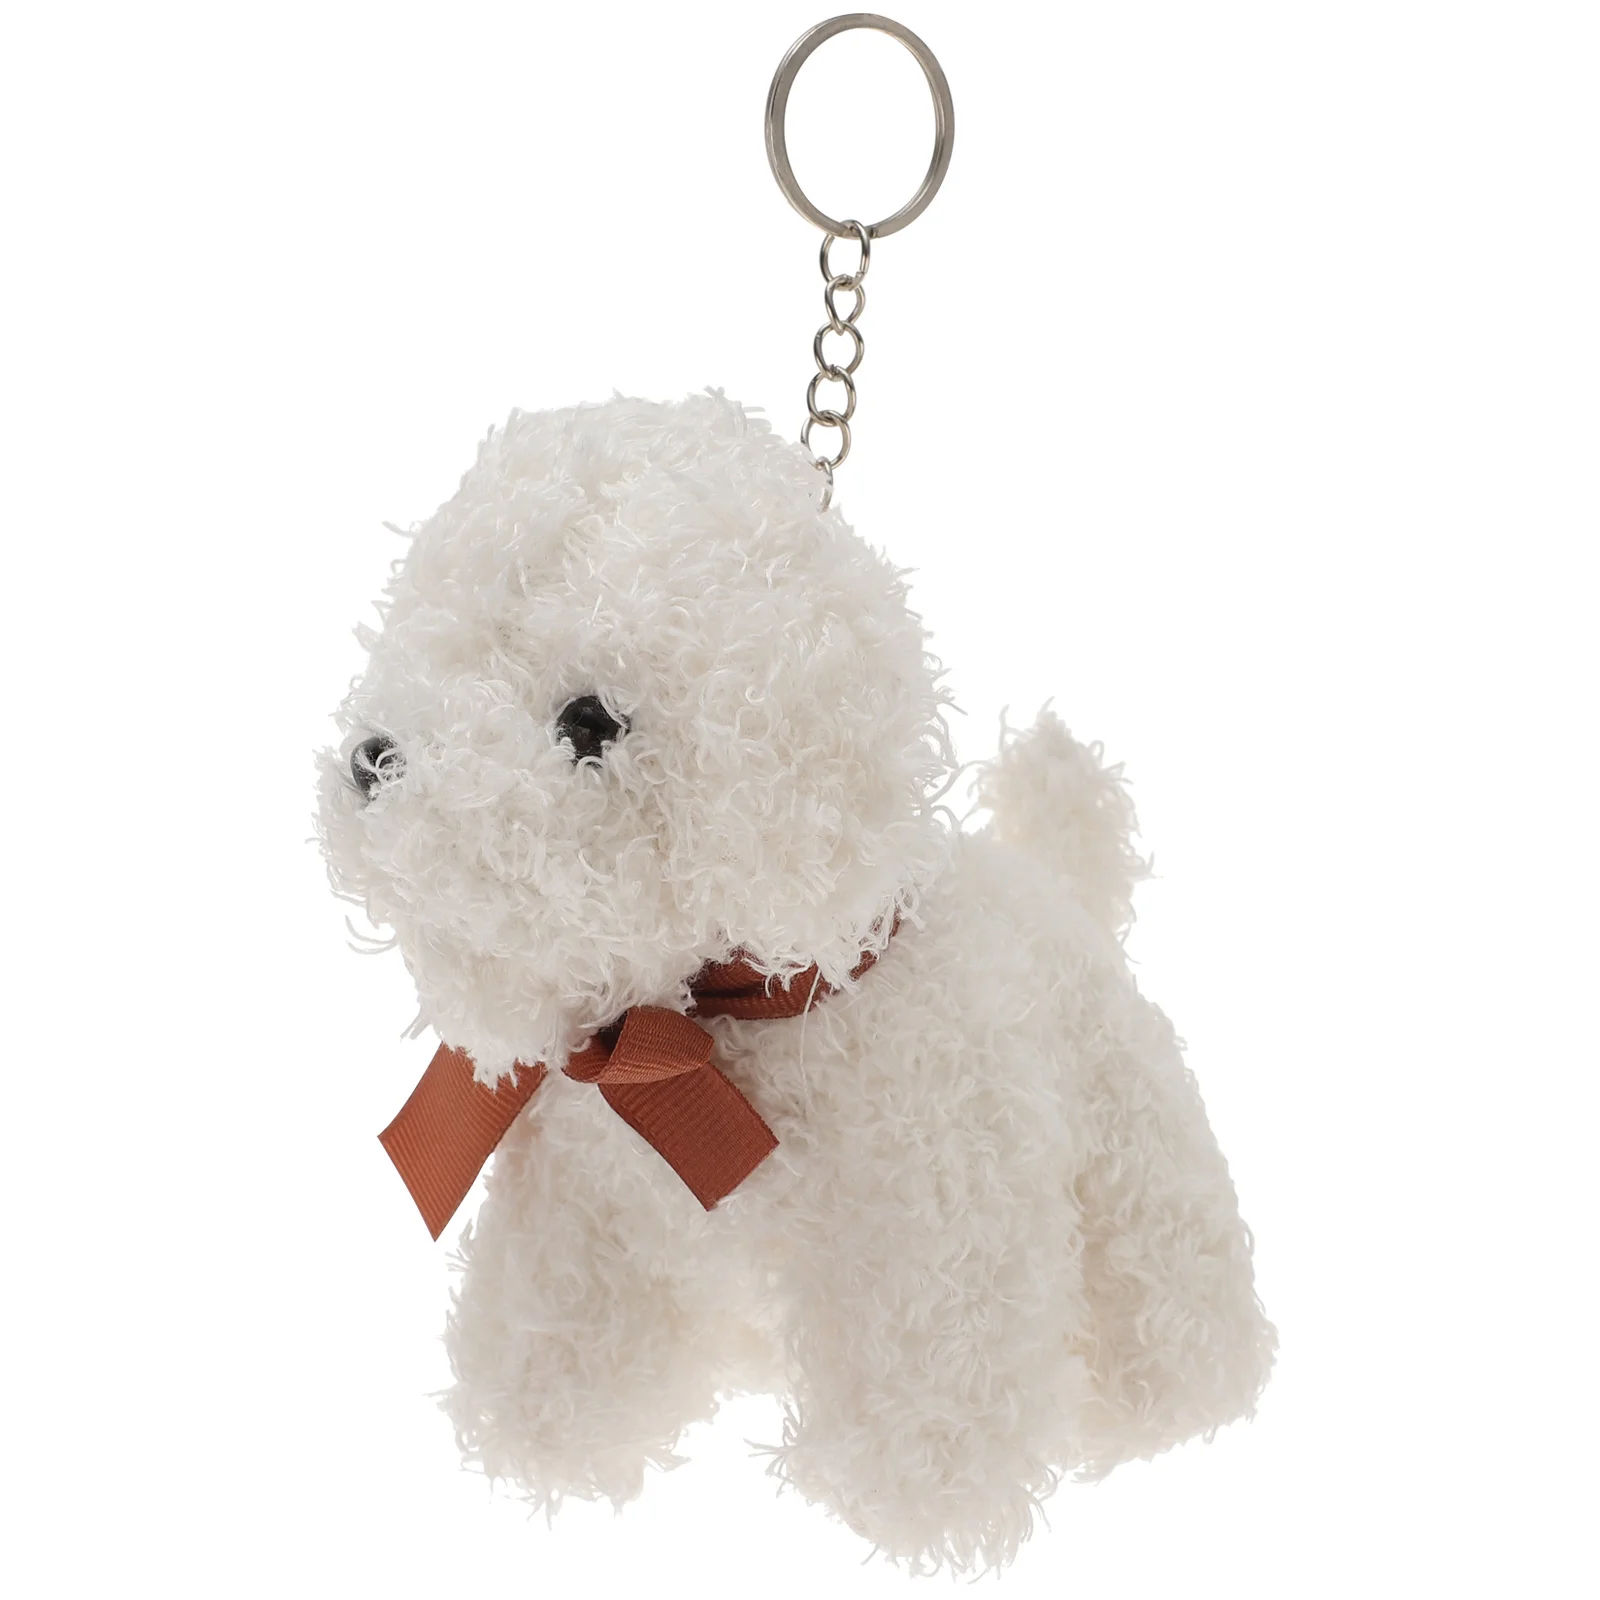 Dog Toy Keychain Ring Backpack Plush for Boys Animal Keychains Golden Retriever Rings